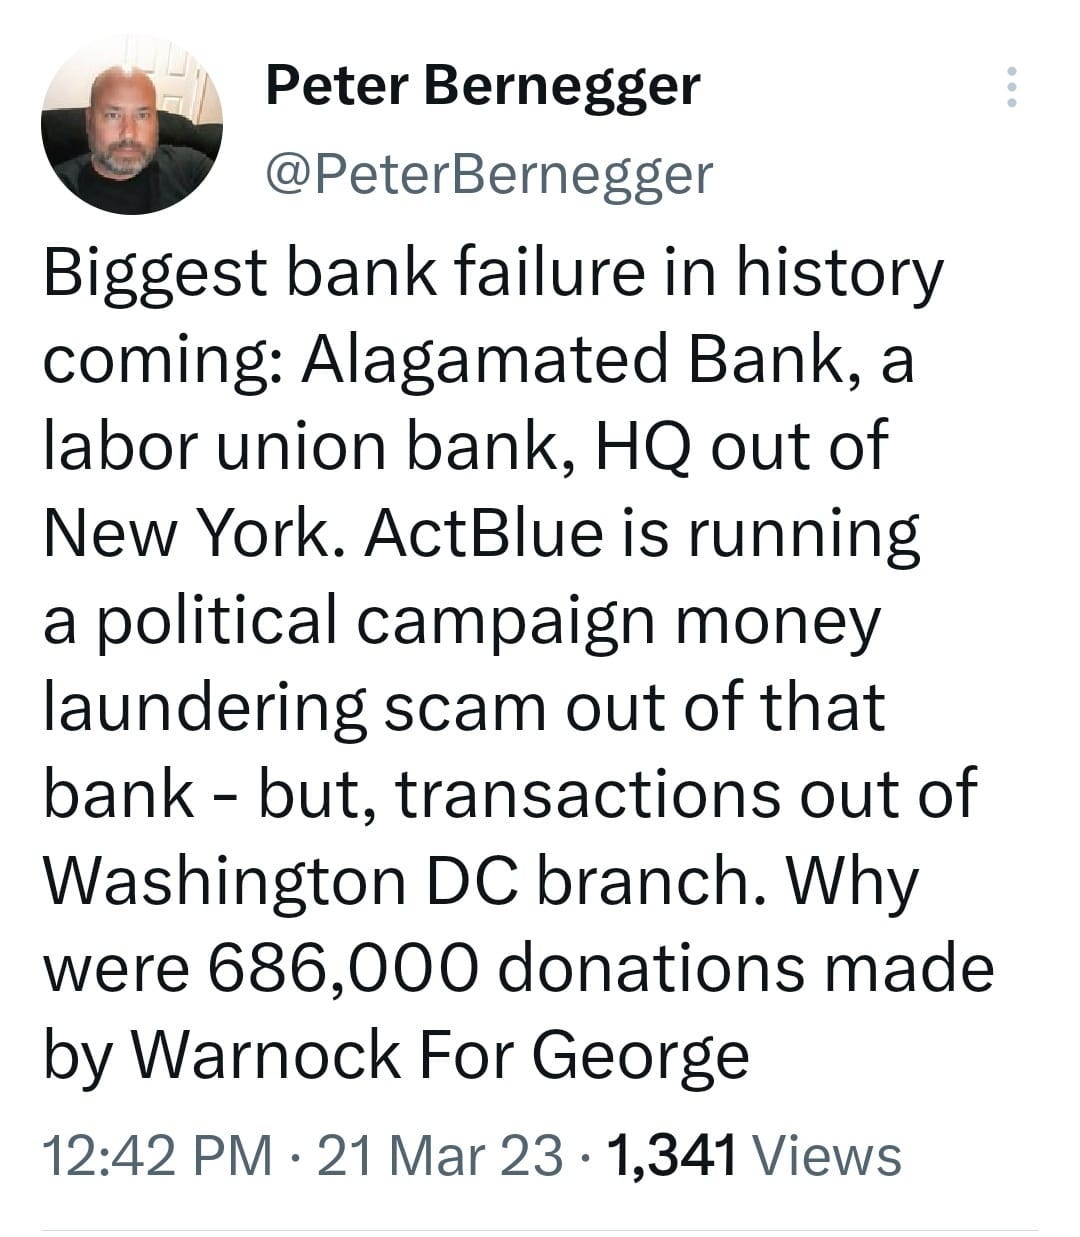 May be a Twitter screenshot of 1 person and text that says 'Peter Bernegger @PeterBernegger Biggest bank failure in history coming: Alagamated Bank, a labor union bank, HQ out of New York. ActBlue is running a political campaign money laundering scam out of that bank- but, transactions out of Washington DC branch. Why were 686,000 donations made by Warnock For George 12:42 PM 21 Mar 23 1,341 Views'